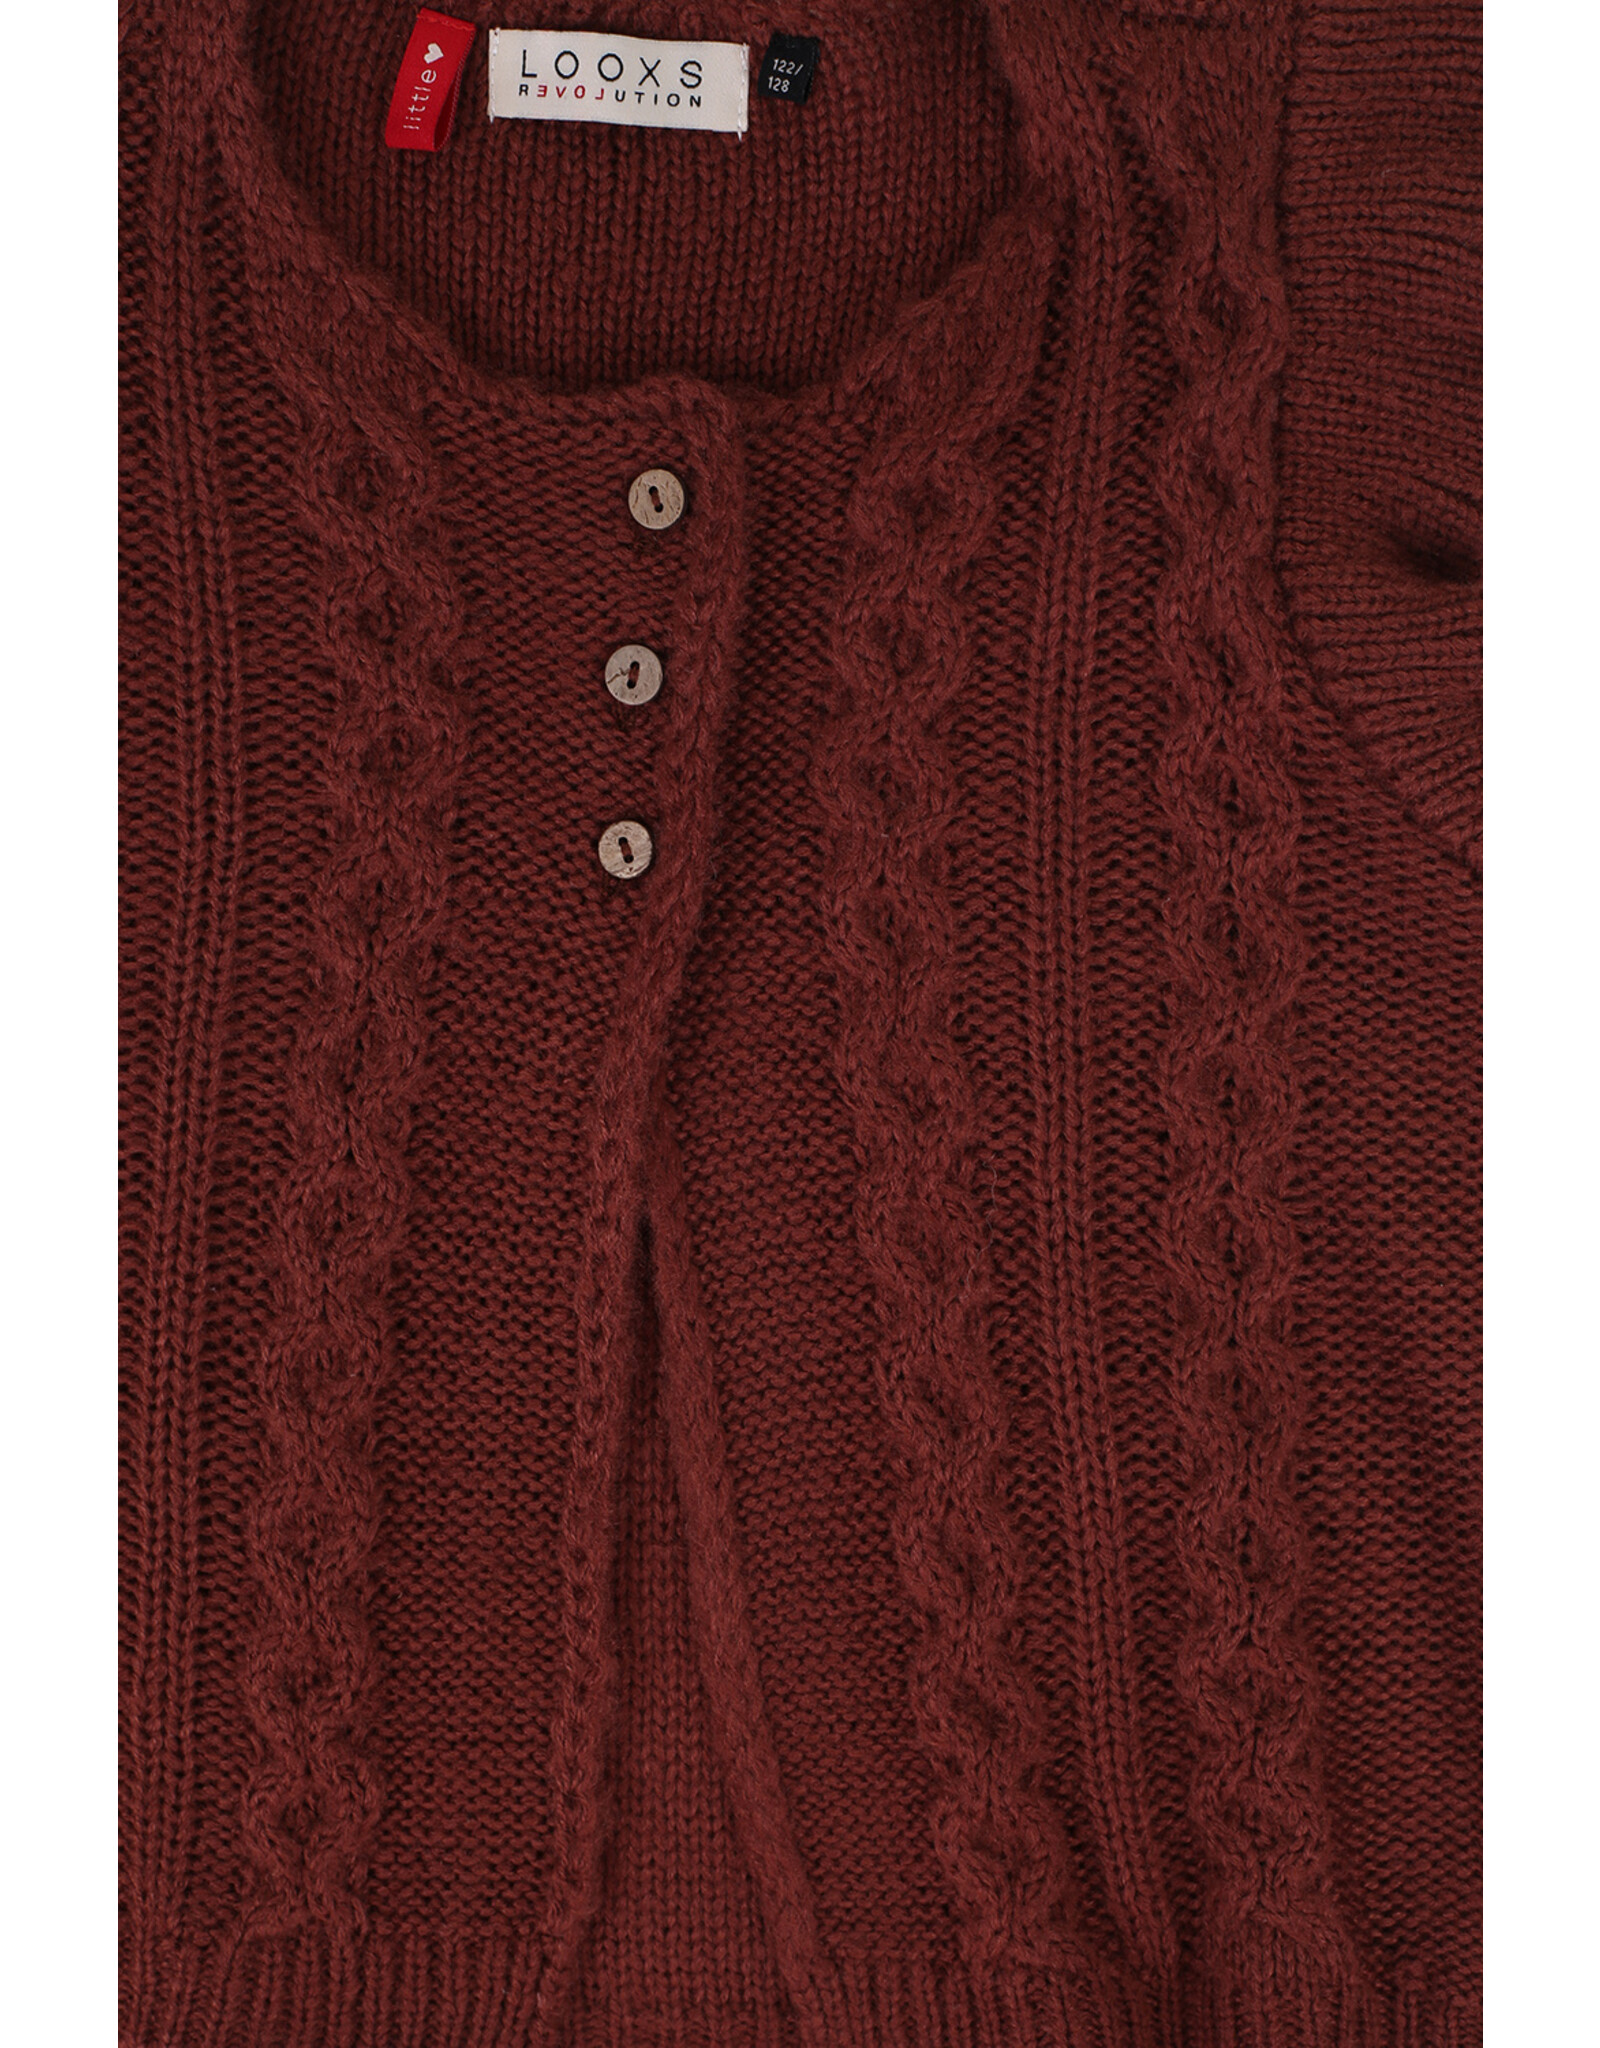 LOOXS Little pulls/sweats/card Little knitted gilet Red Wine